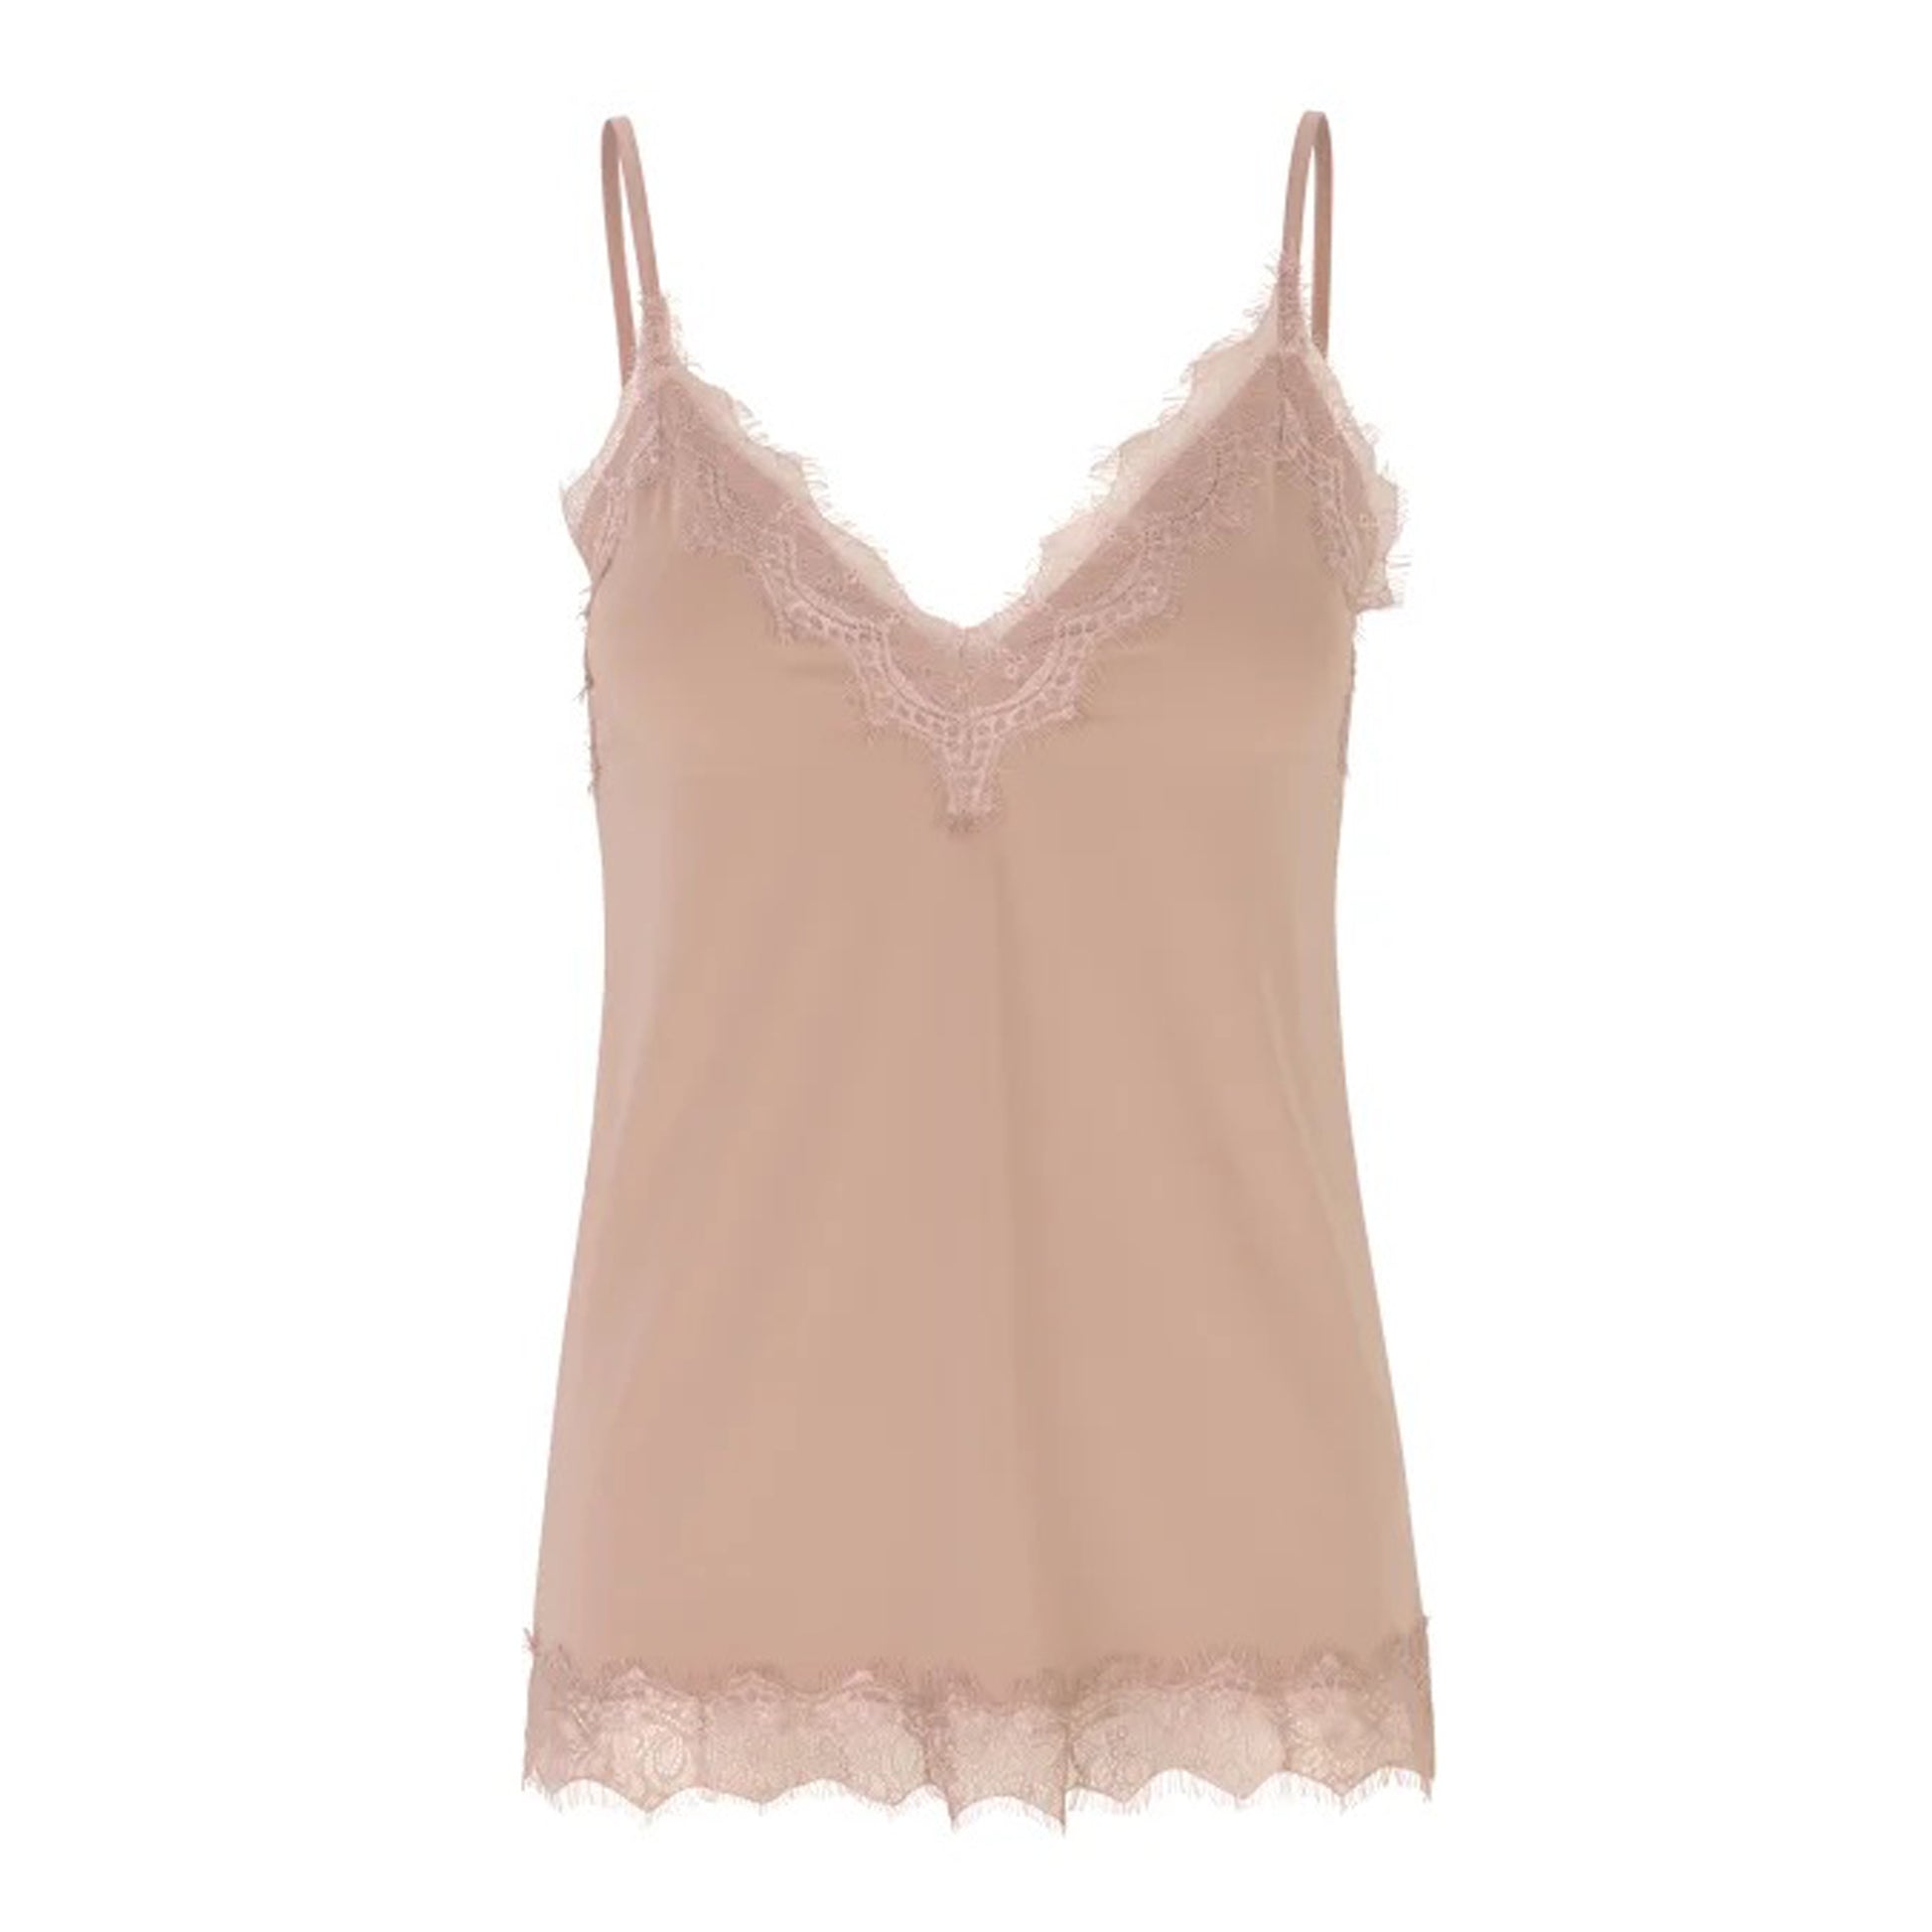 A women's Rosemunde pink cami top with lace trim and lightweight fabric.